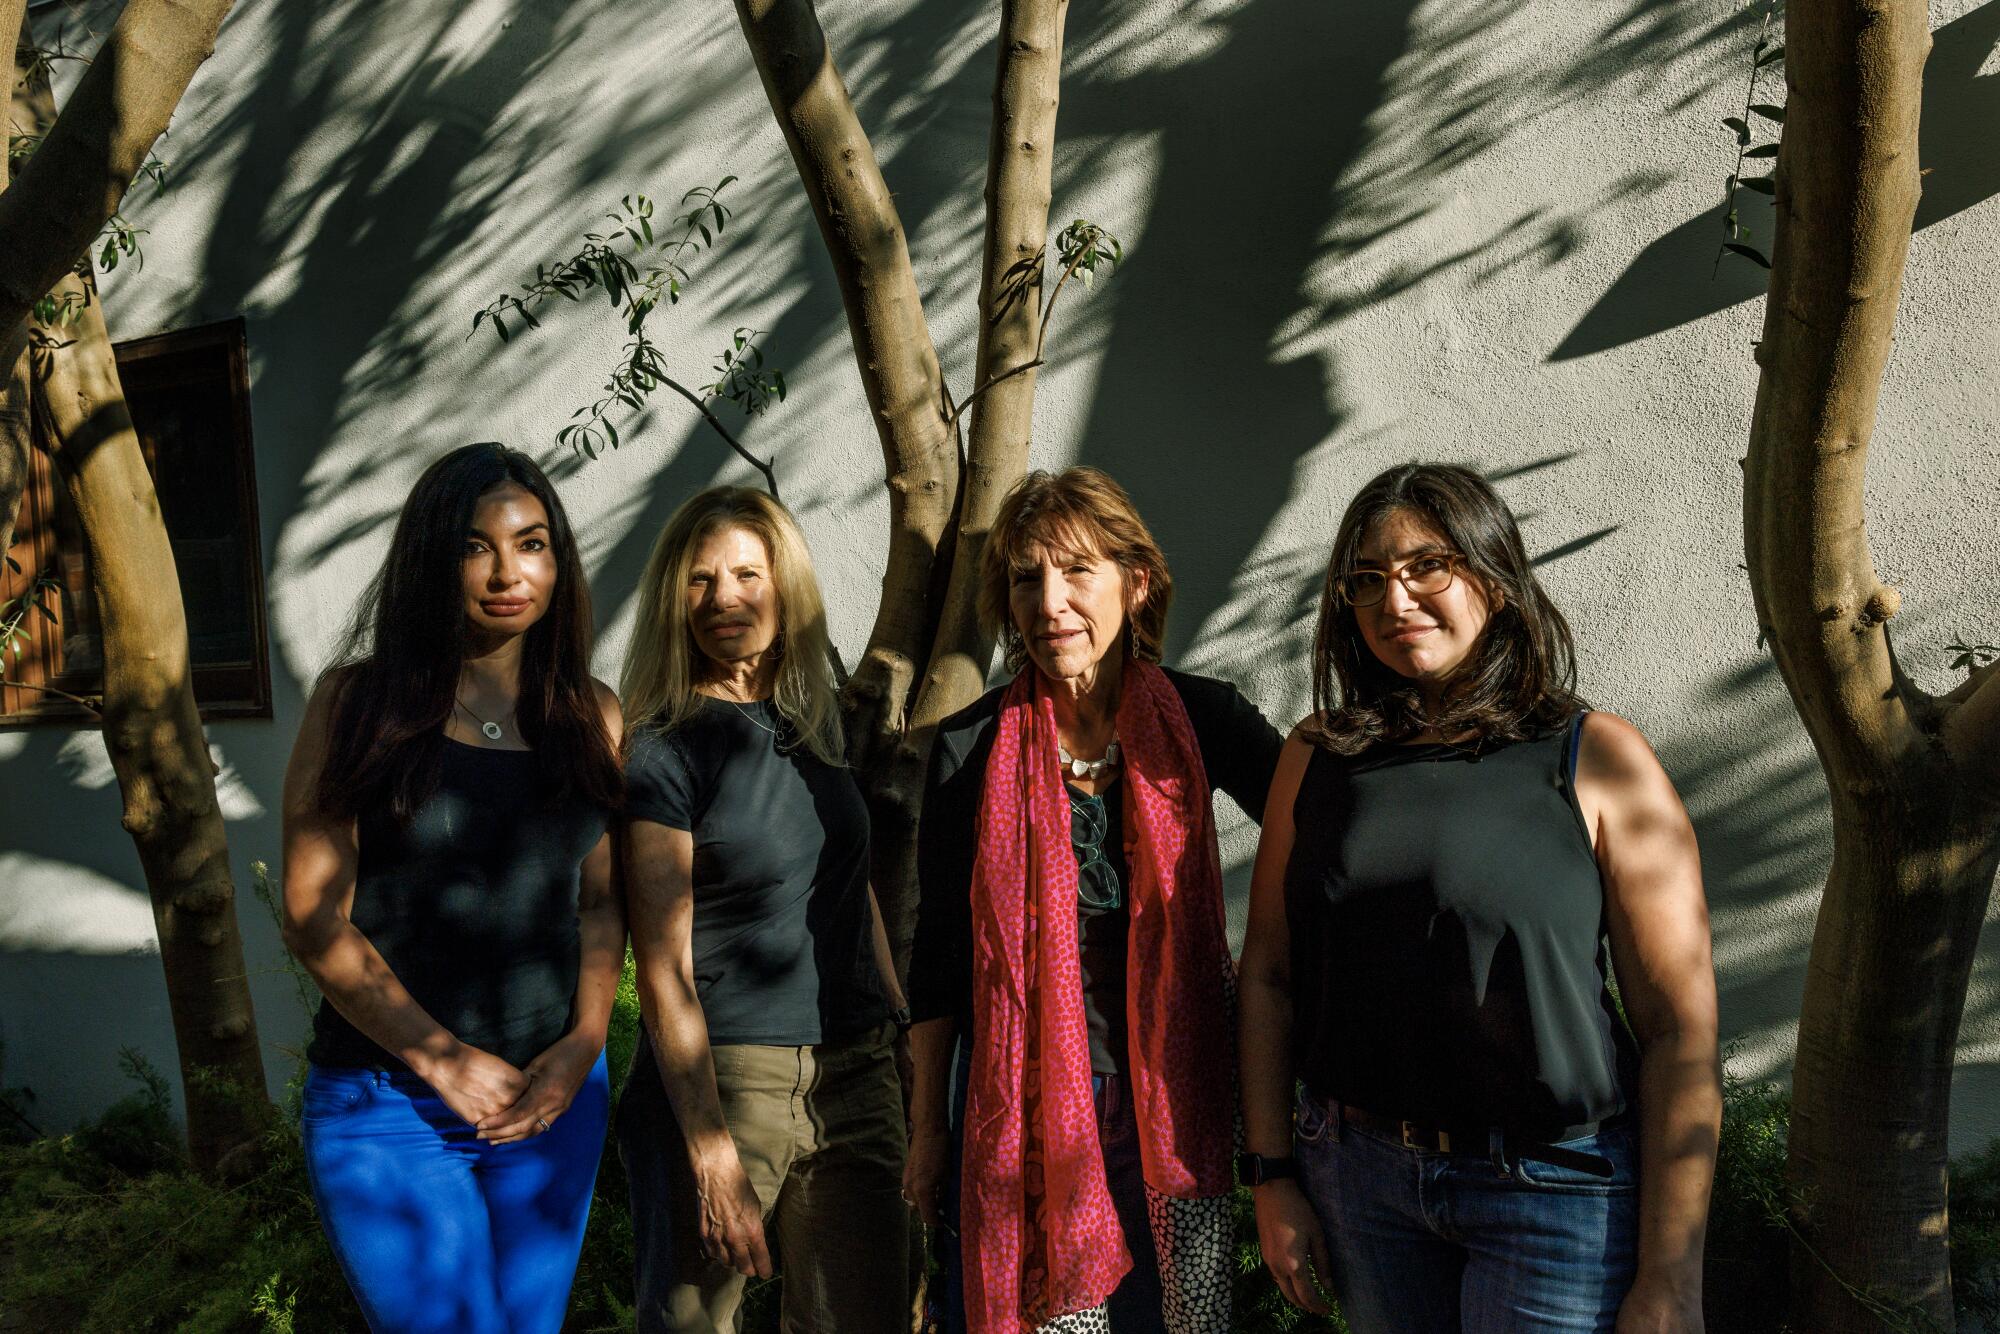 Four women who call themselves the "abortion yentas."